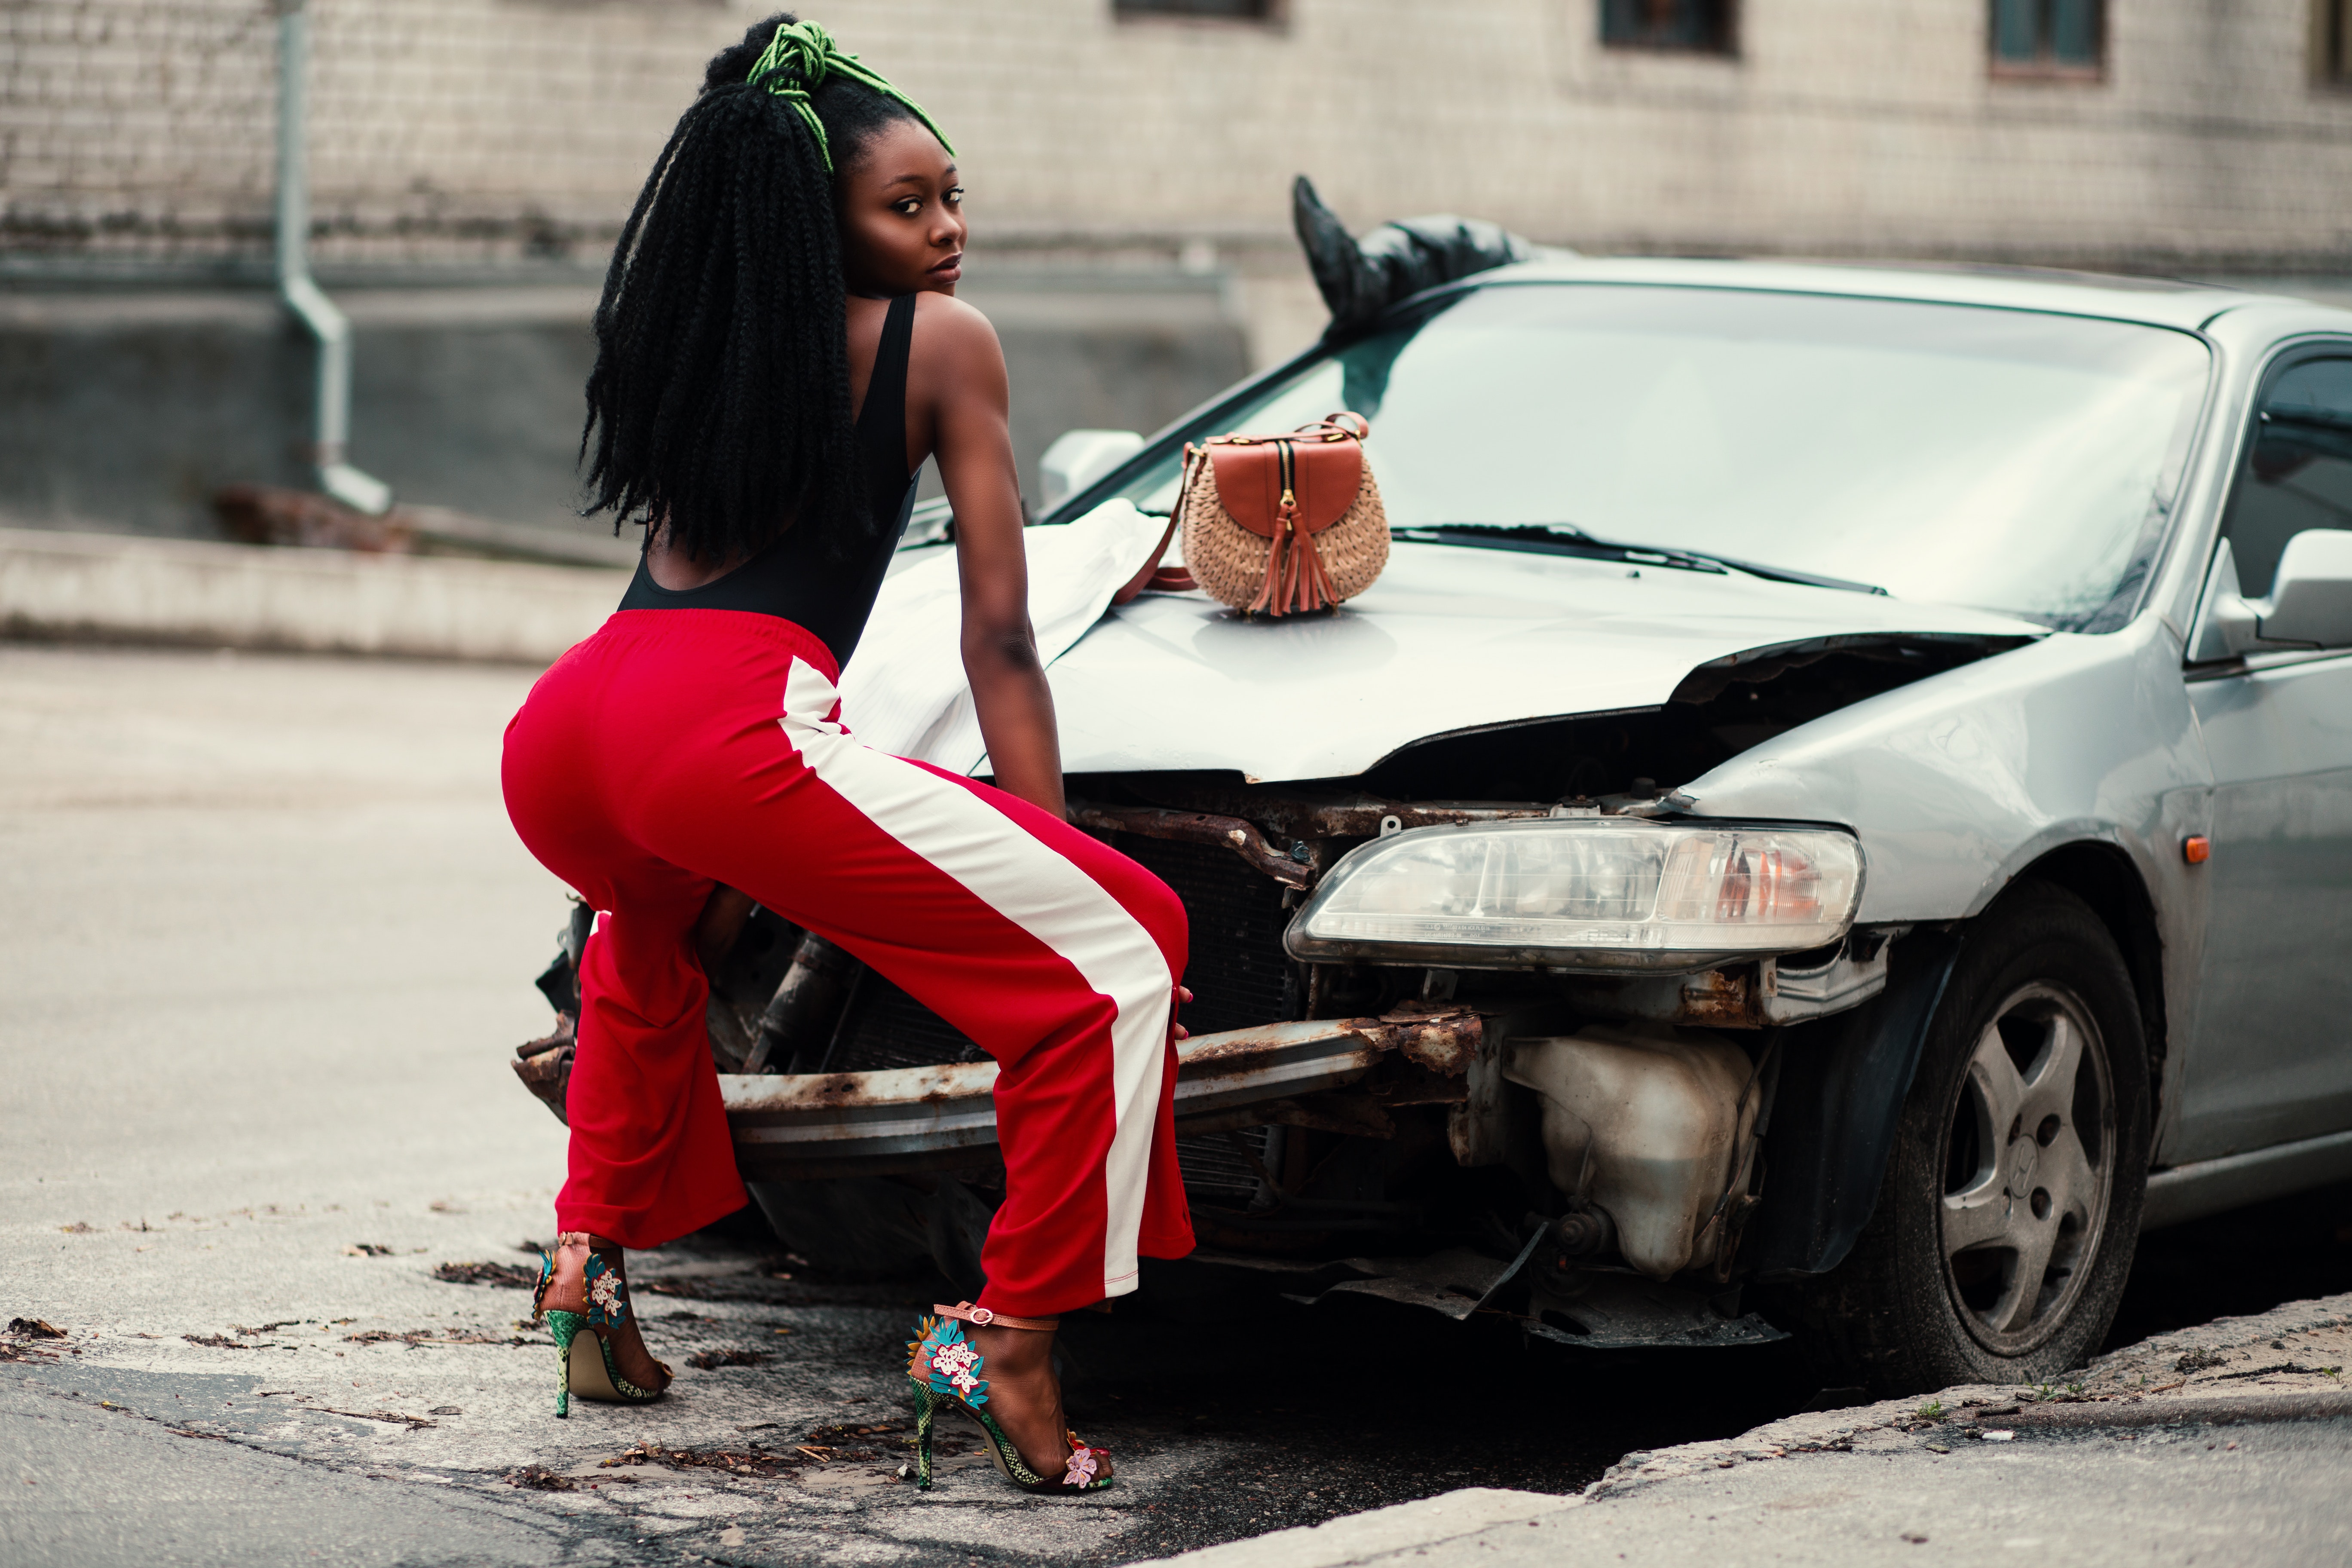 Photograph of woman about to twerk in front of vehicle